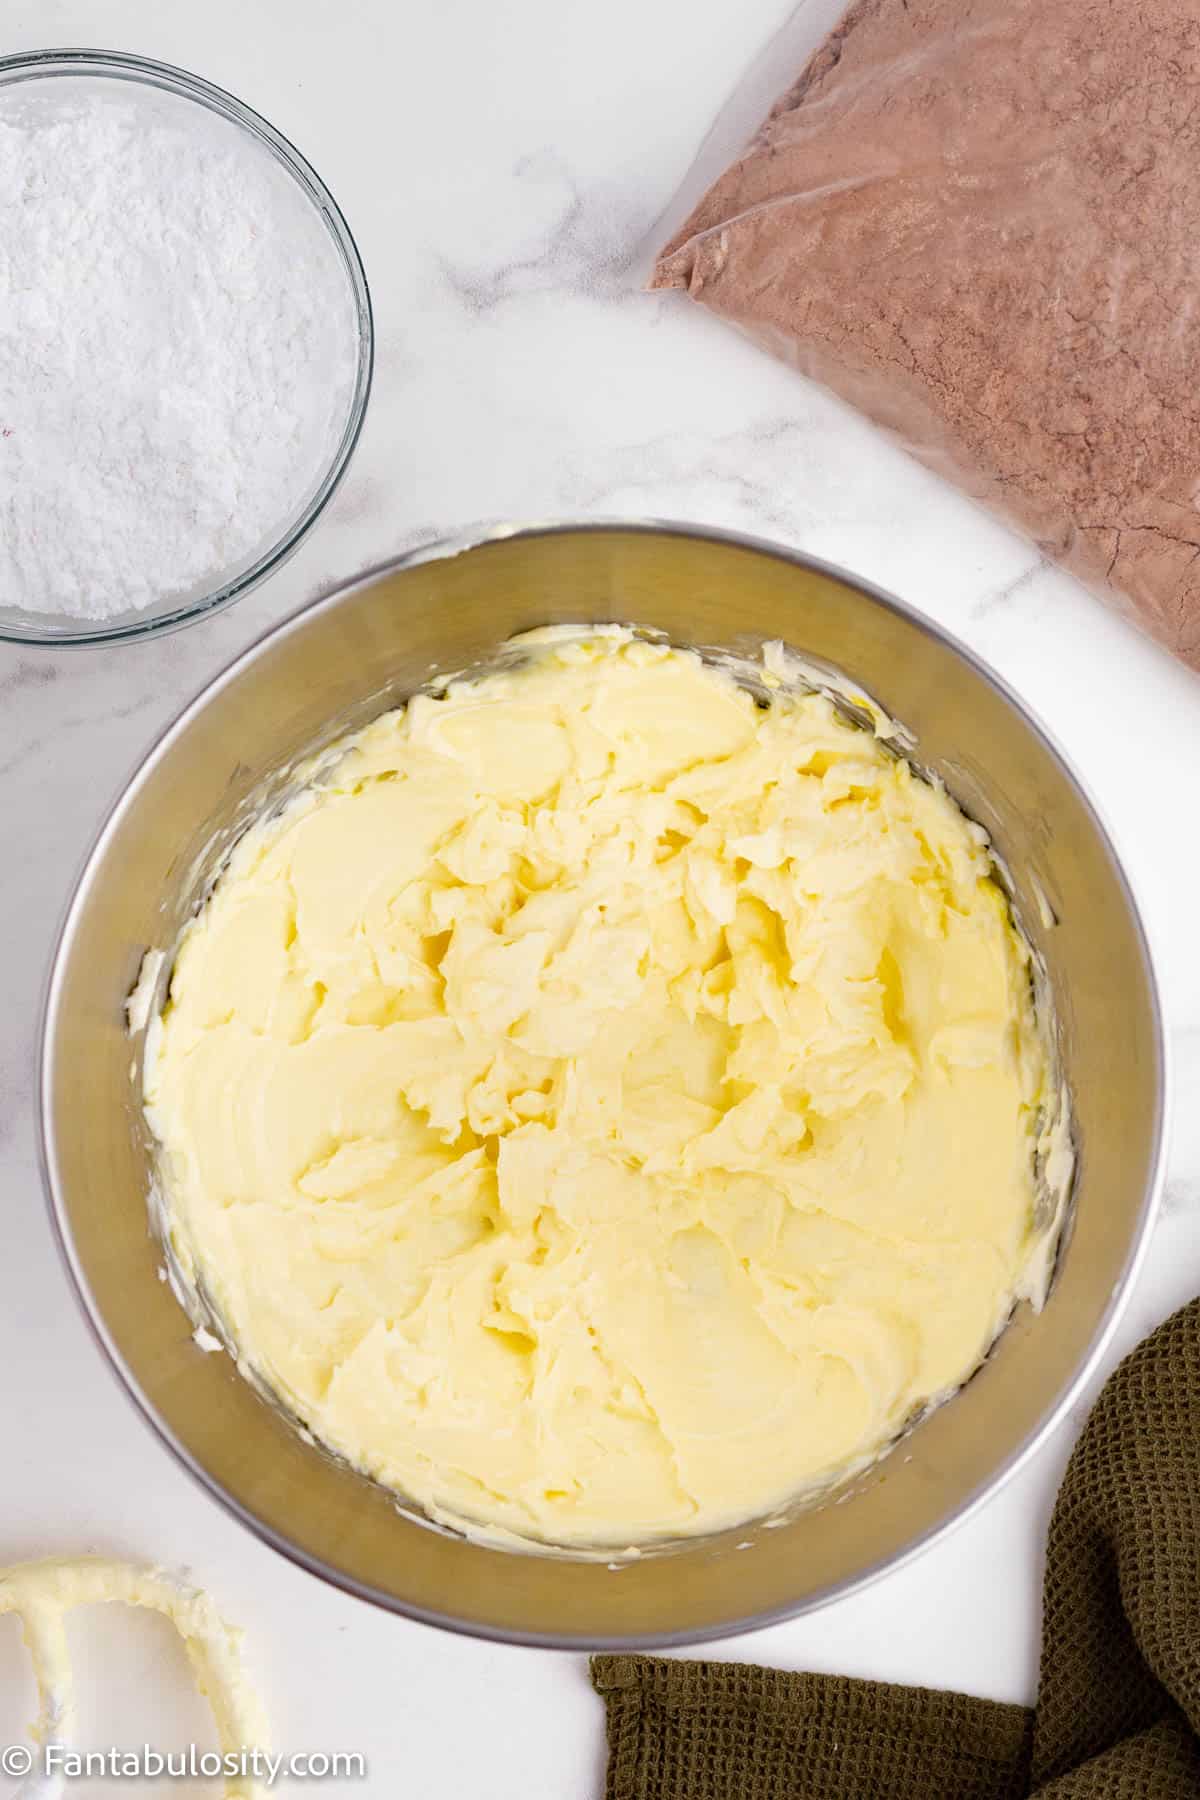 A light yellow creamy mixture is shown in a large metal mixing bowl